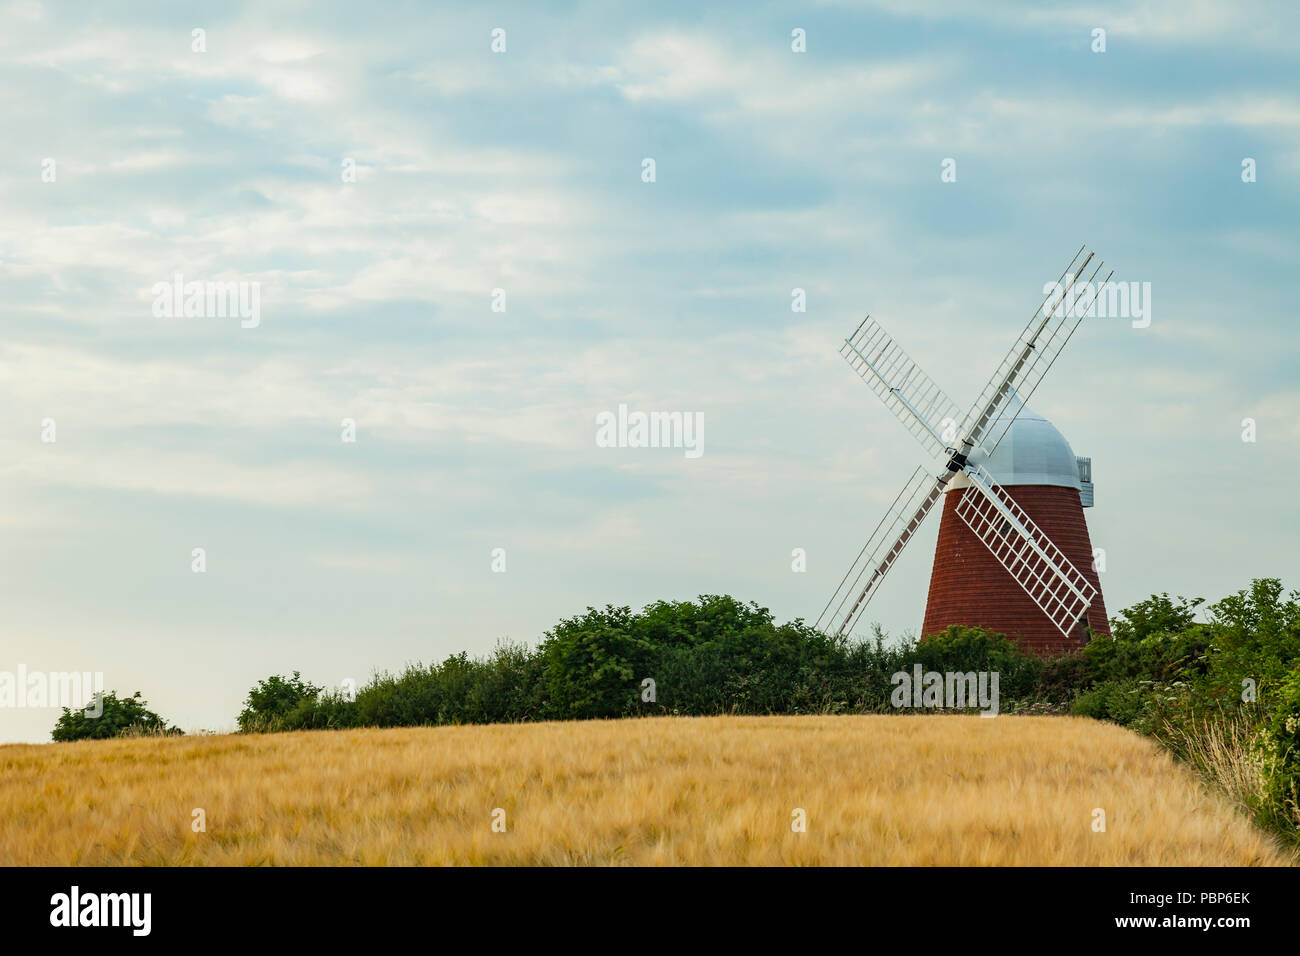 Summer evening at Halnaker windmill, West Sussex, England. Stock Photo